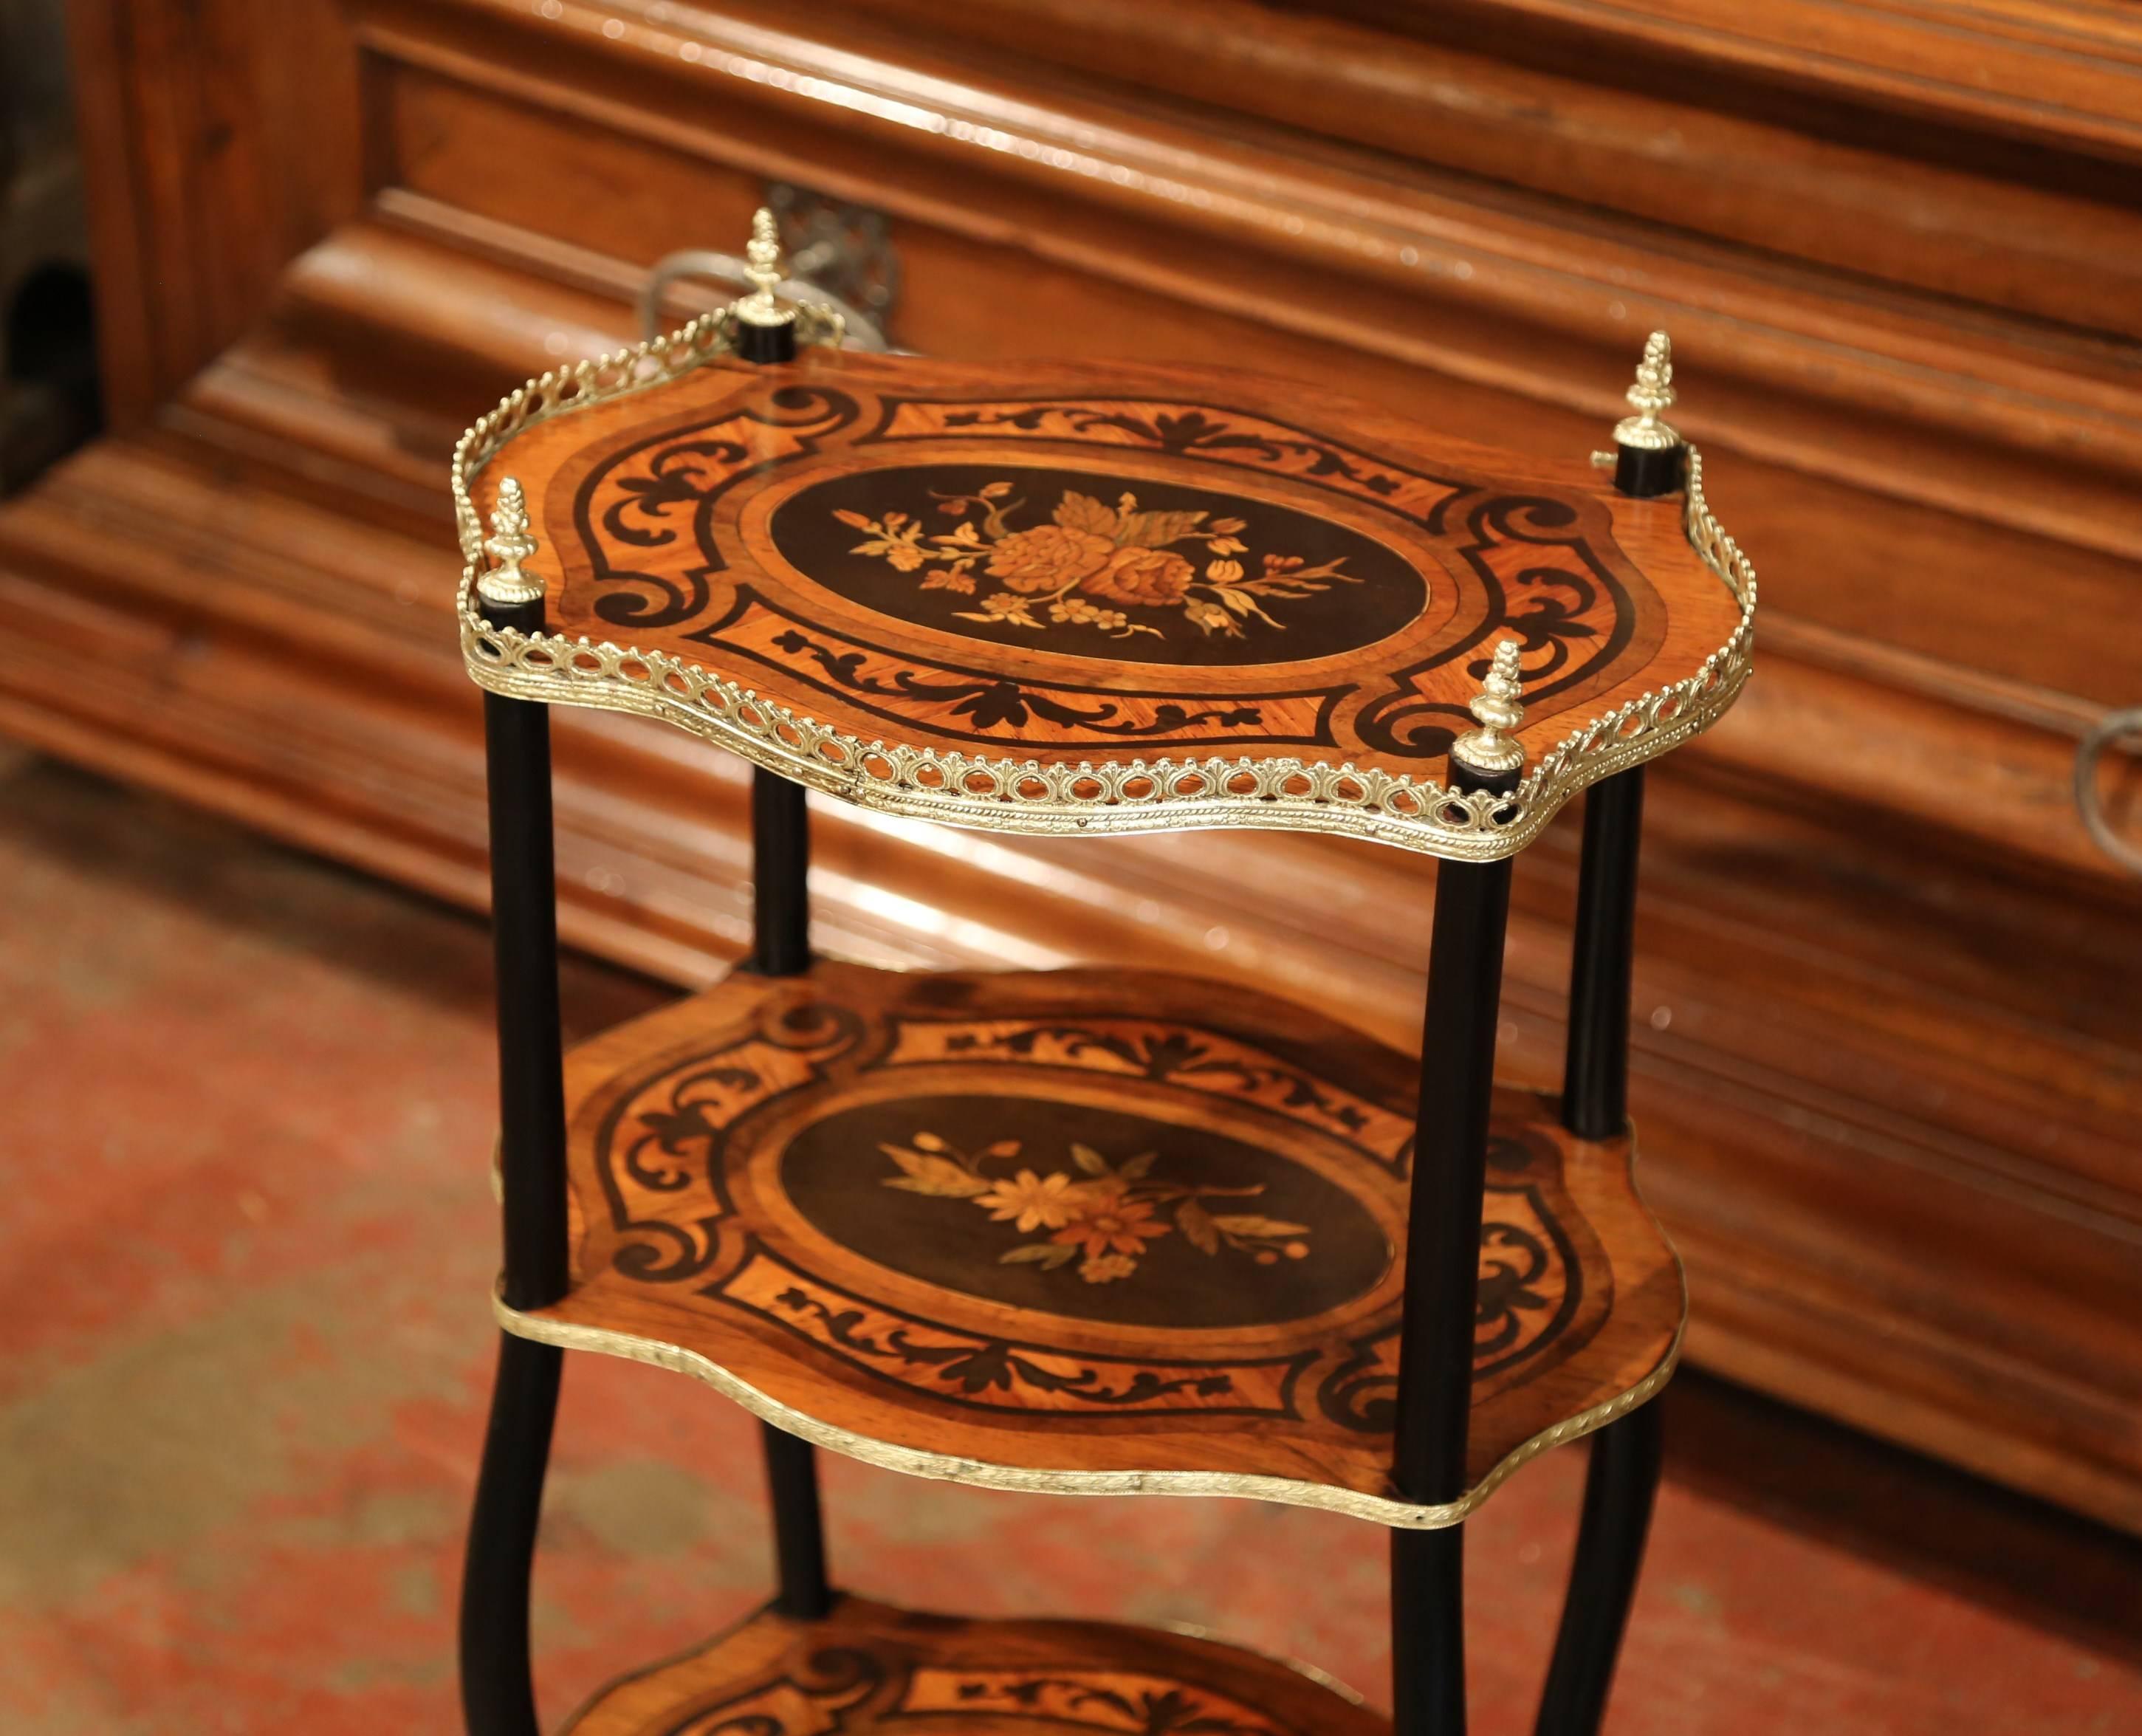 This elegant, antique small table was created in France, circa 1870. Oval in shape, this side table features a marquetry top with bouquet of flowers encircled by a bronze gallery and four finials. Underneath, the table has two additional shelves